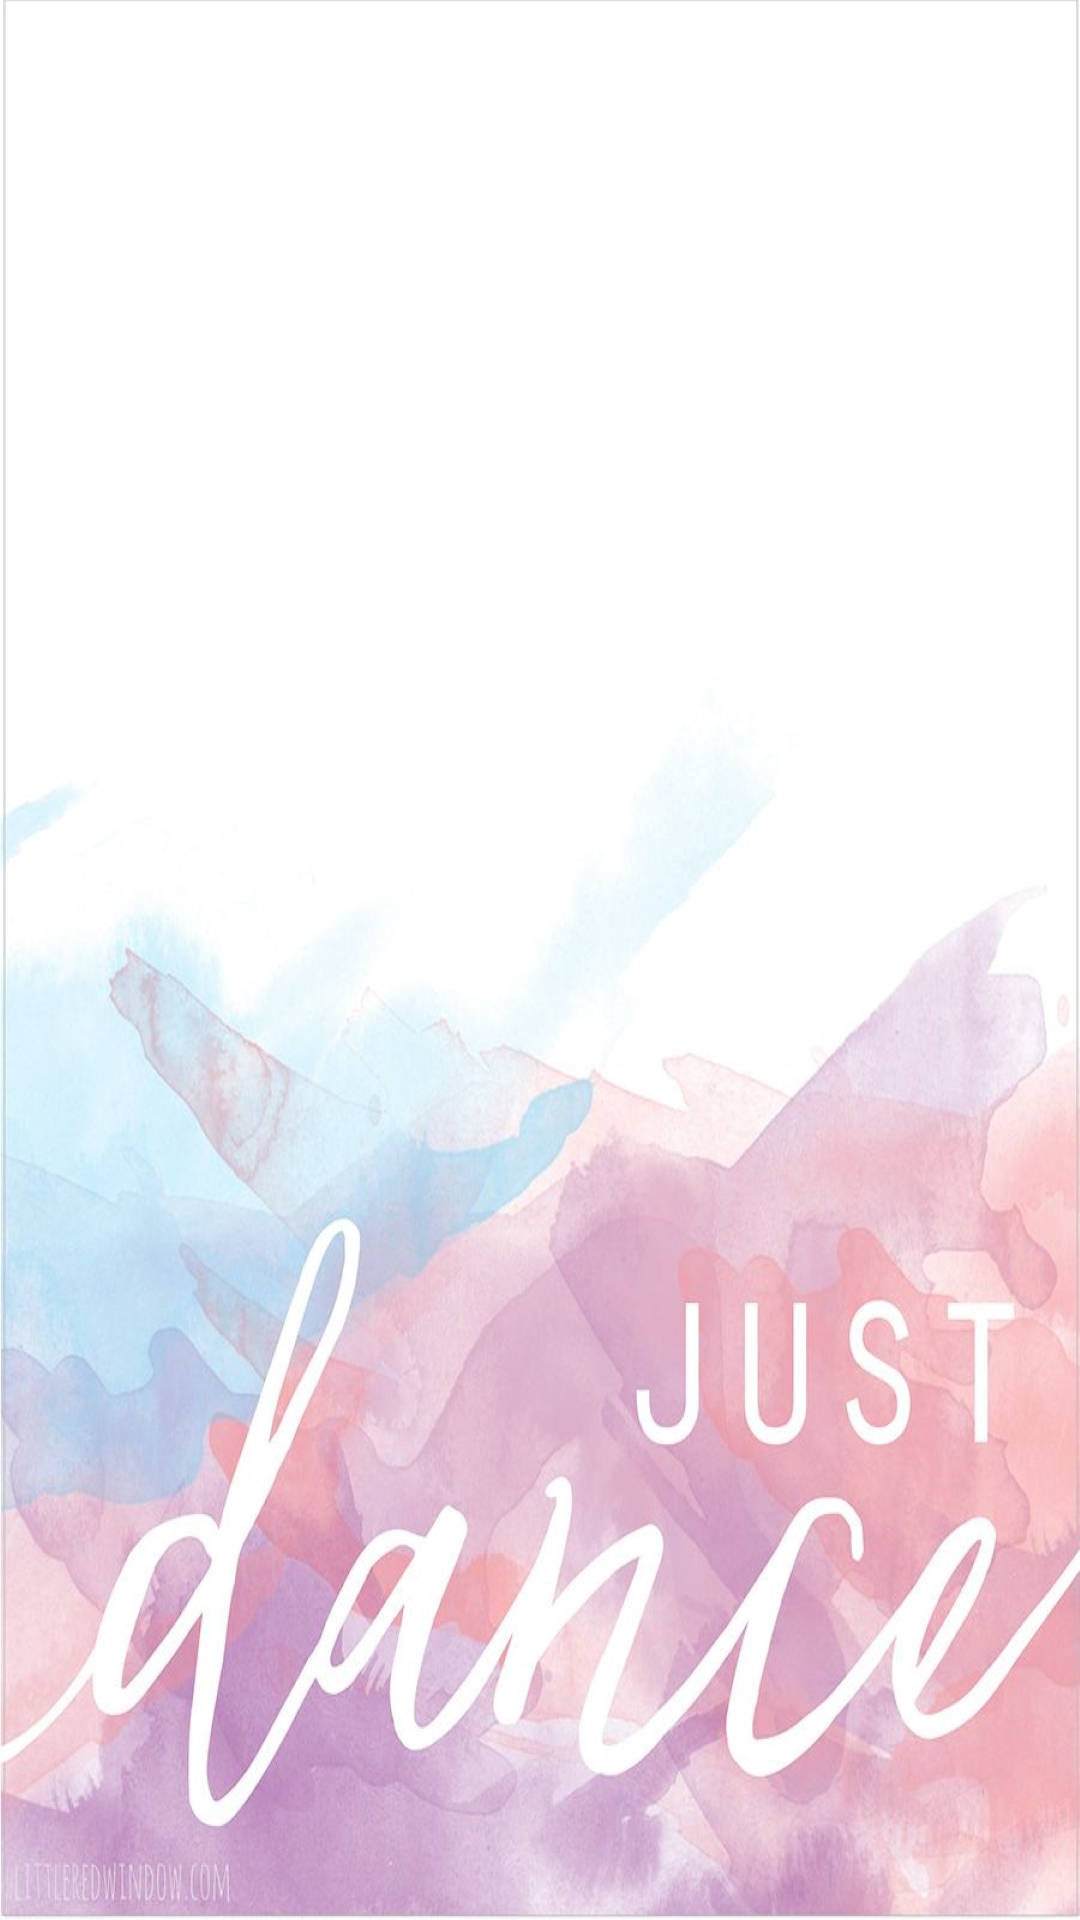 Just Dance Aesthetic Poster Background